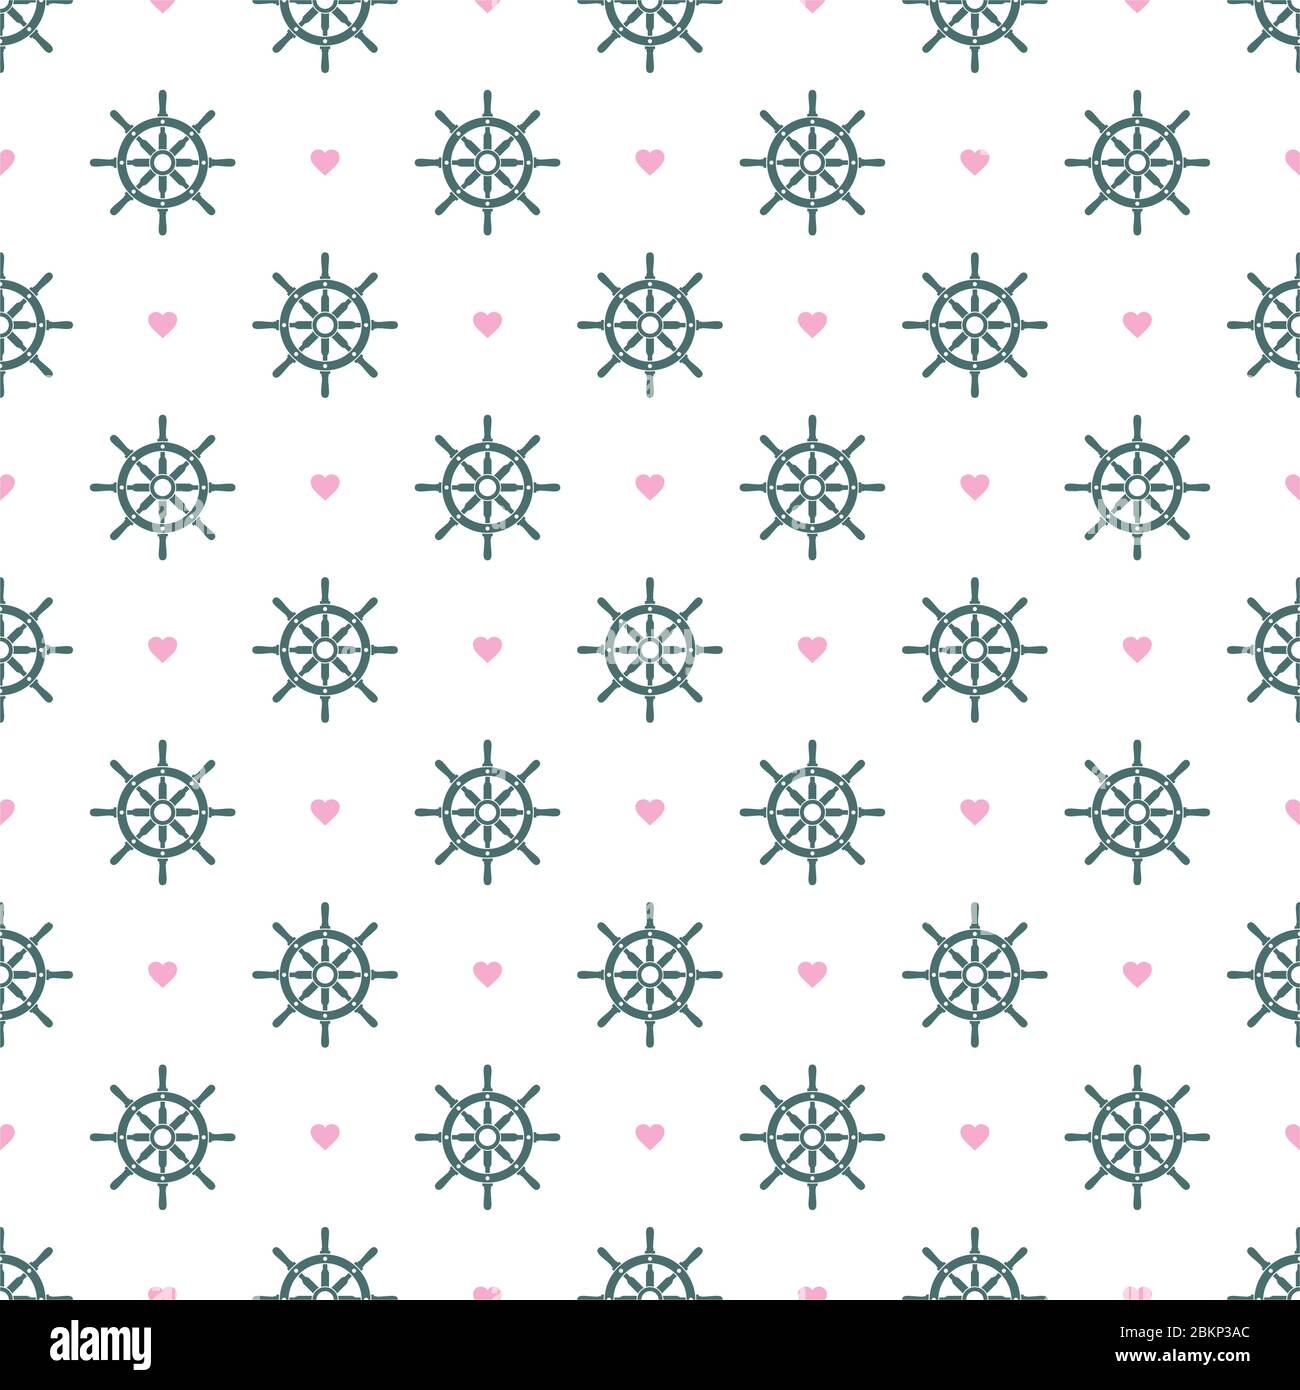 Ship helm vector seamless pattern. Helm, steering wheel and hearts seamless texture. Steering wheel and heart symbols seamless pattern. Stock Vector